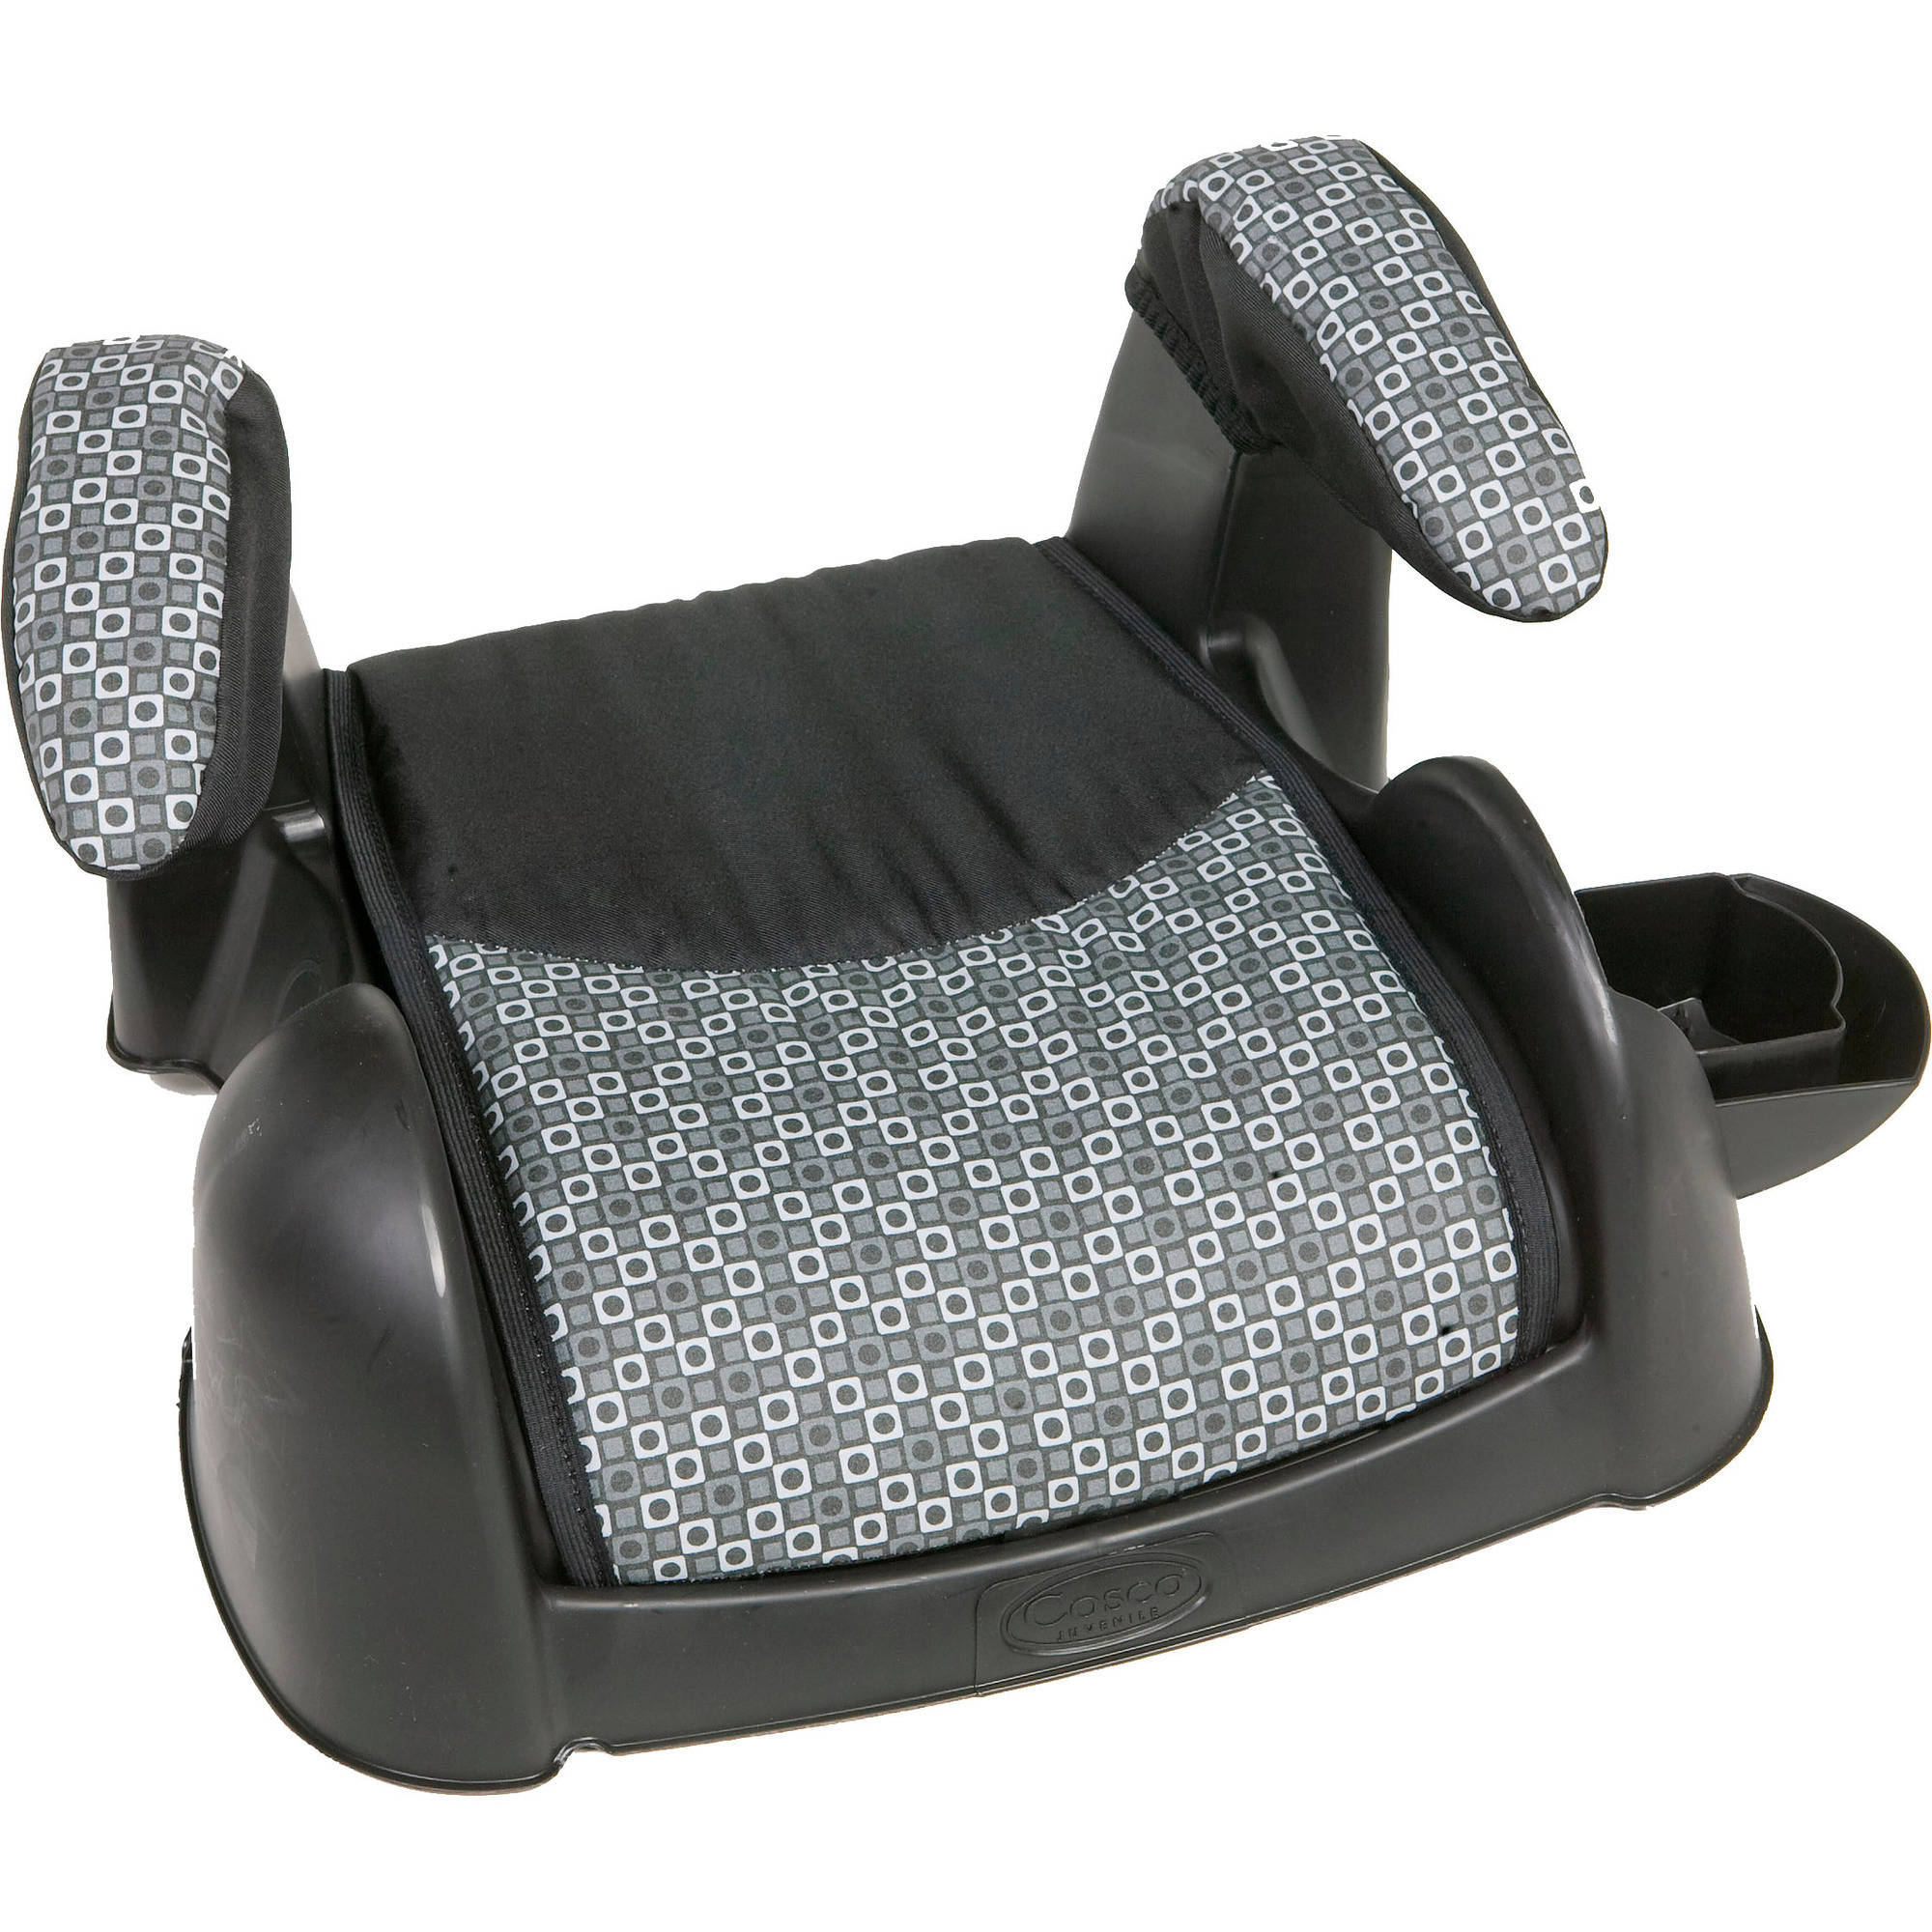 Cosco Ambassador Backless Booster Car Seat, Moonless Night - image 1 of 1